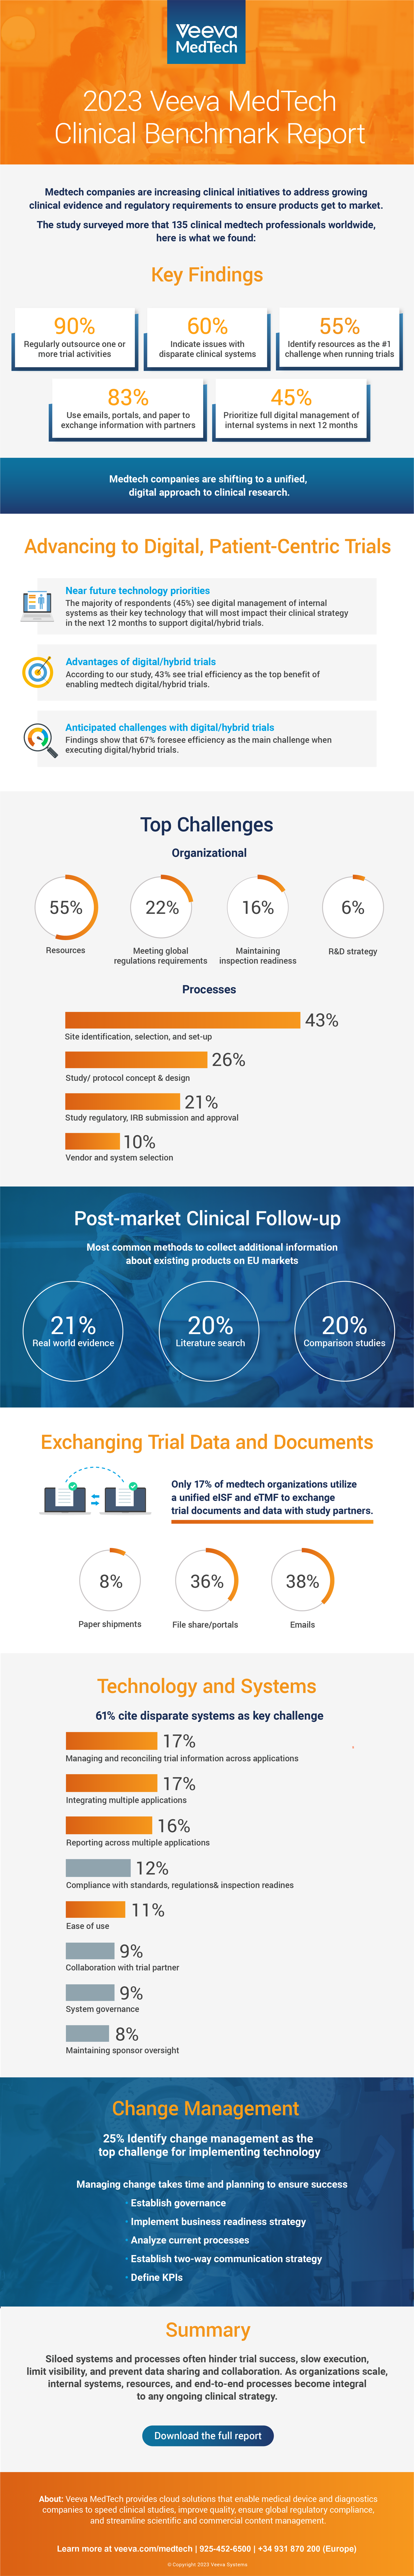 Infographic by Veeva MedTech illustrating current state of clinical operations across processes.